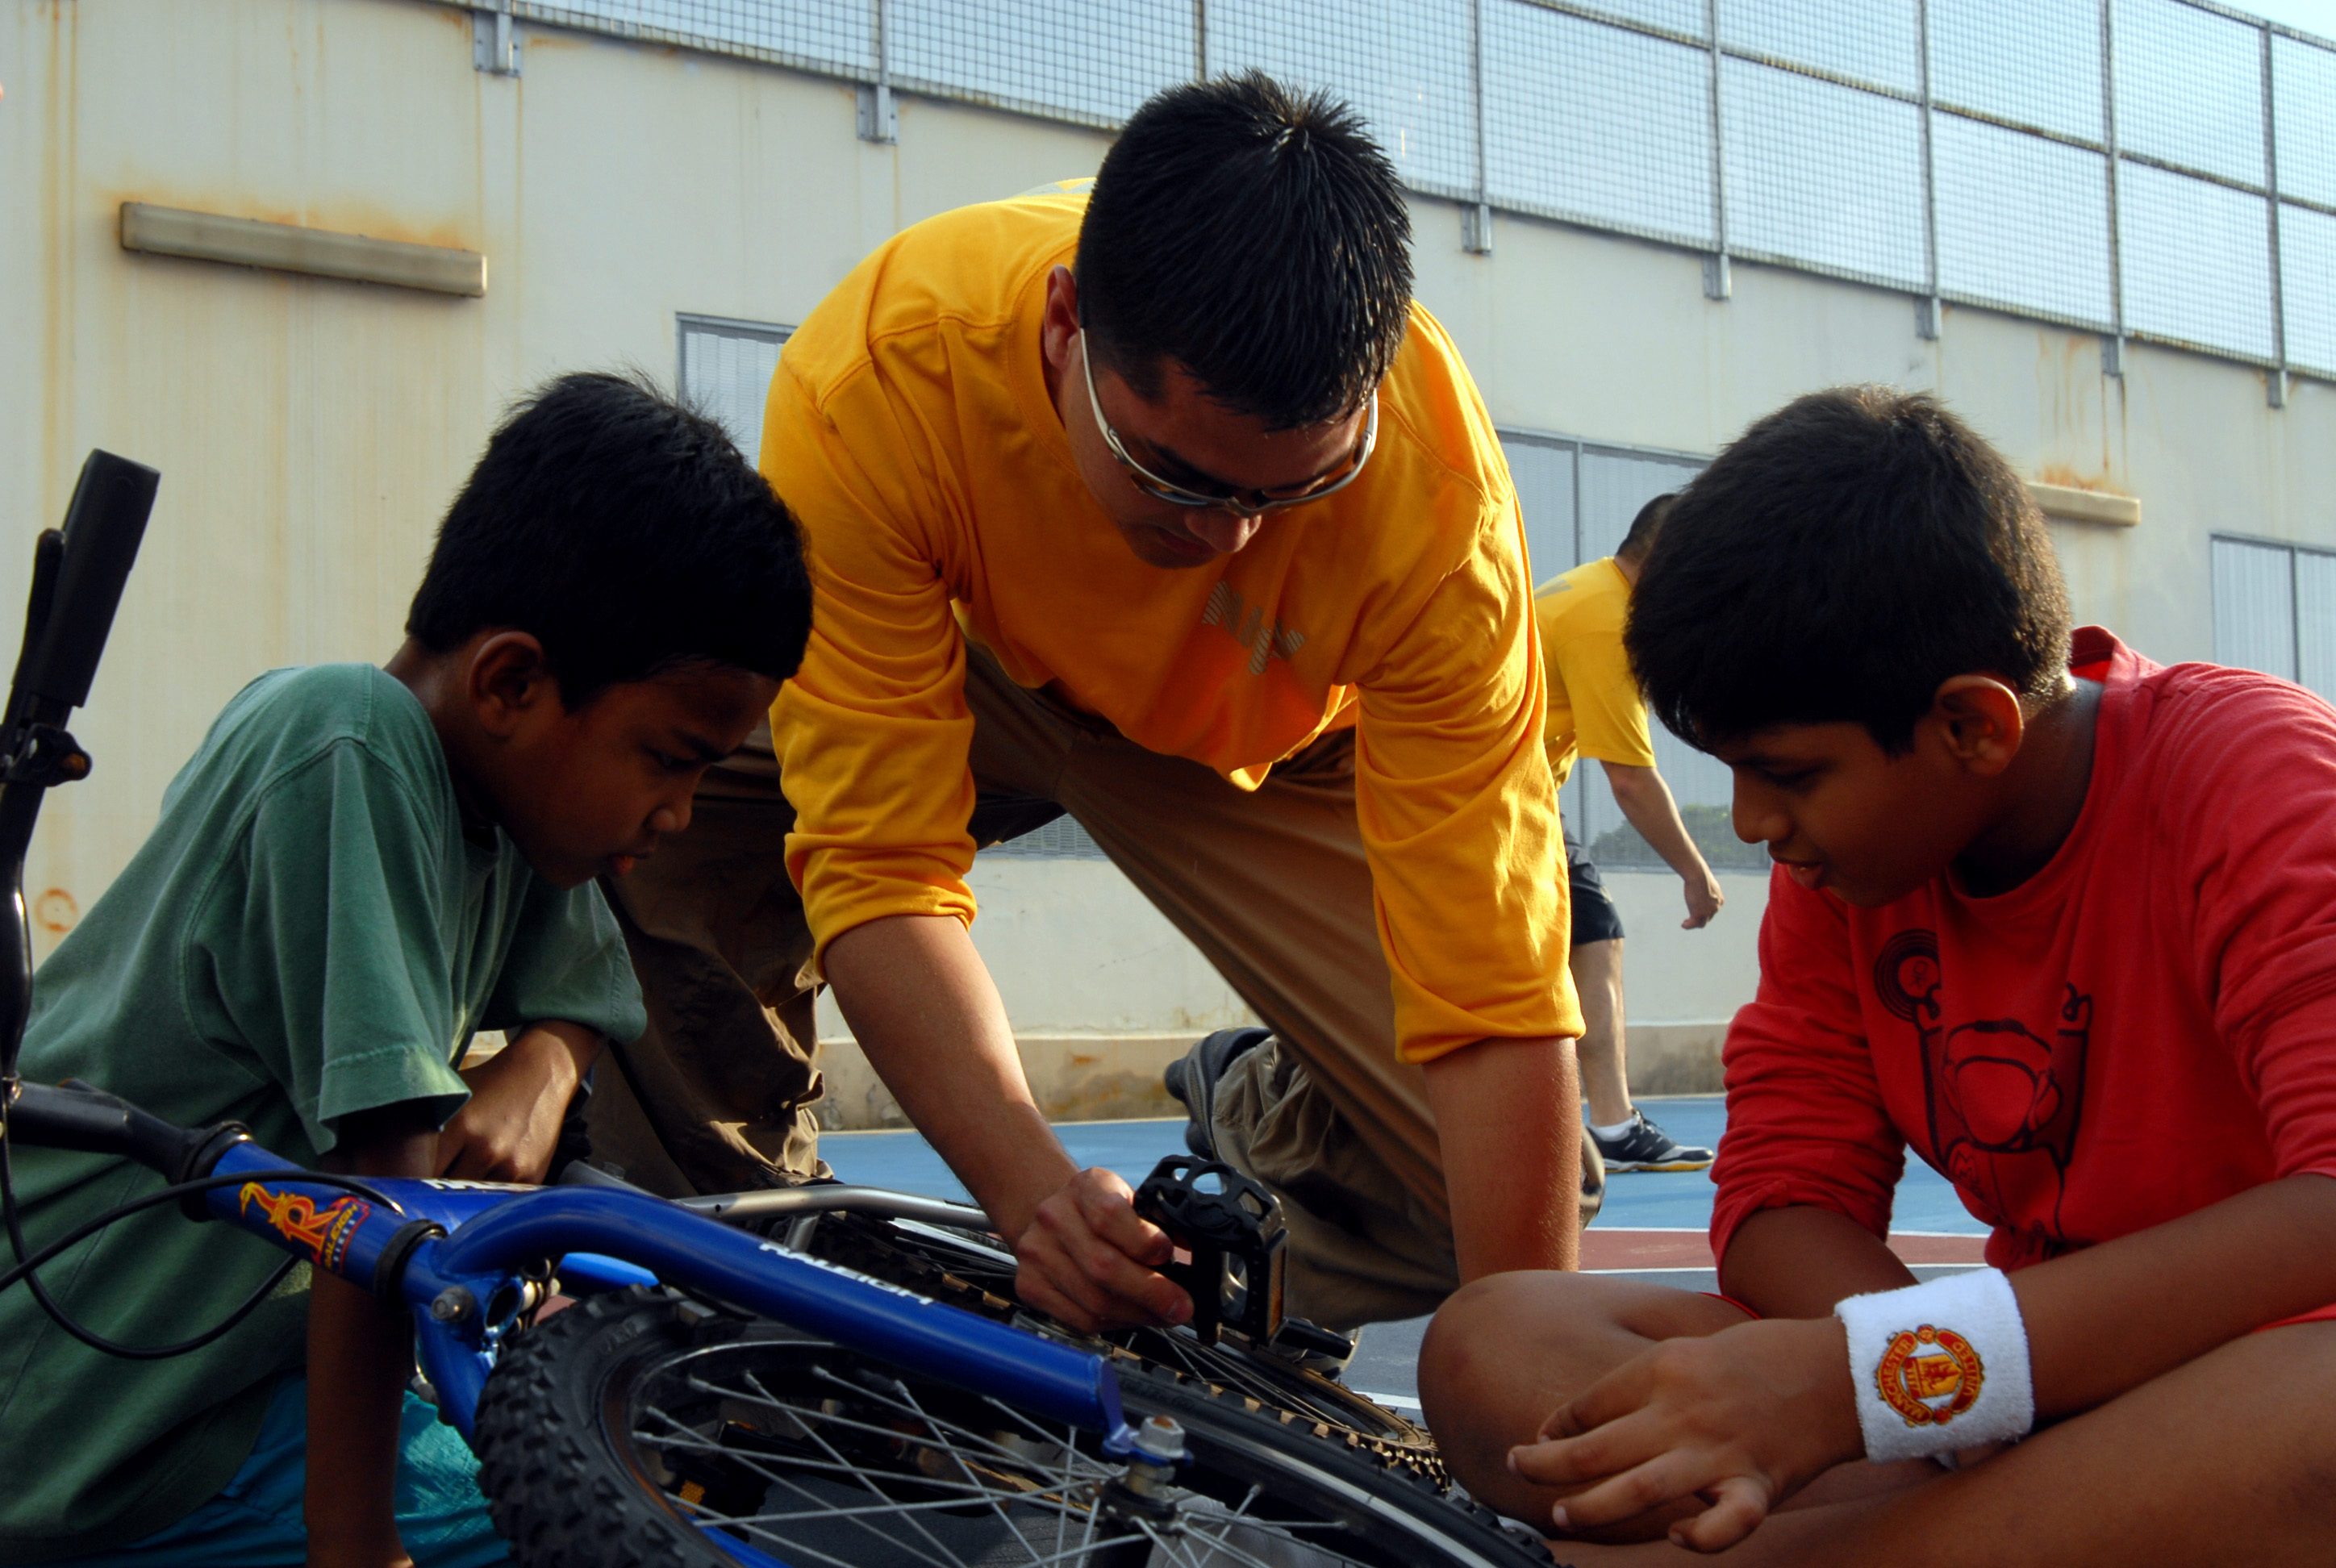 US Navy 091031-N-4908A-245 Electronics Technician 2nd Class Ryan James, assigned to the amphibious command ship USS Blue Ridge (LCC 19), helps a child fix his bicycle